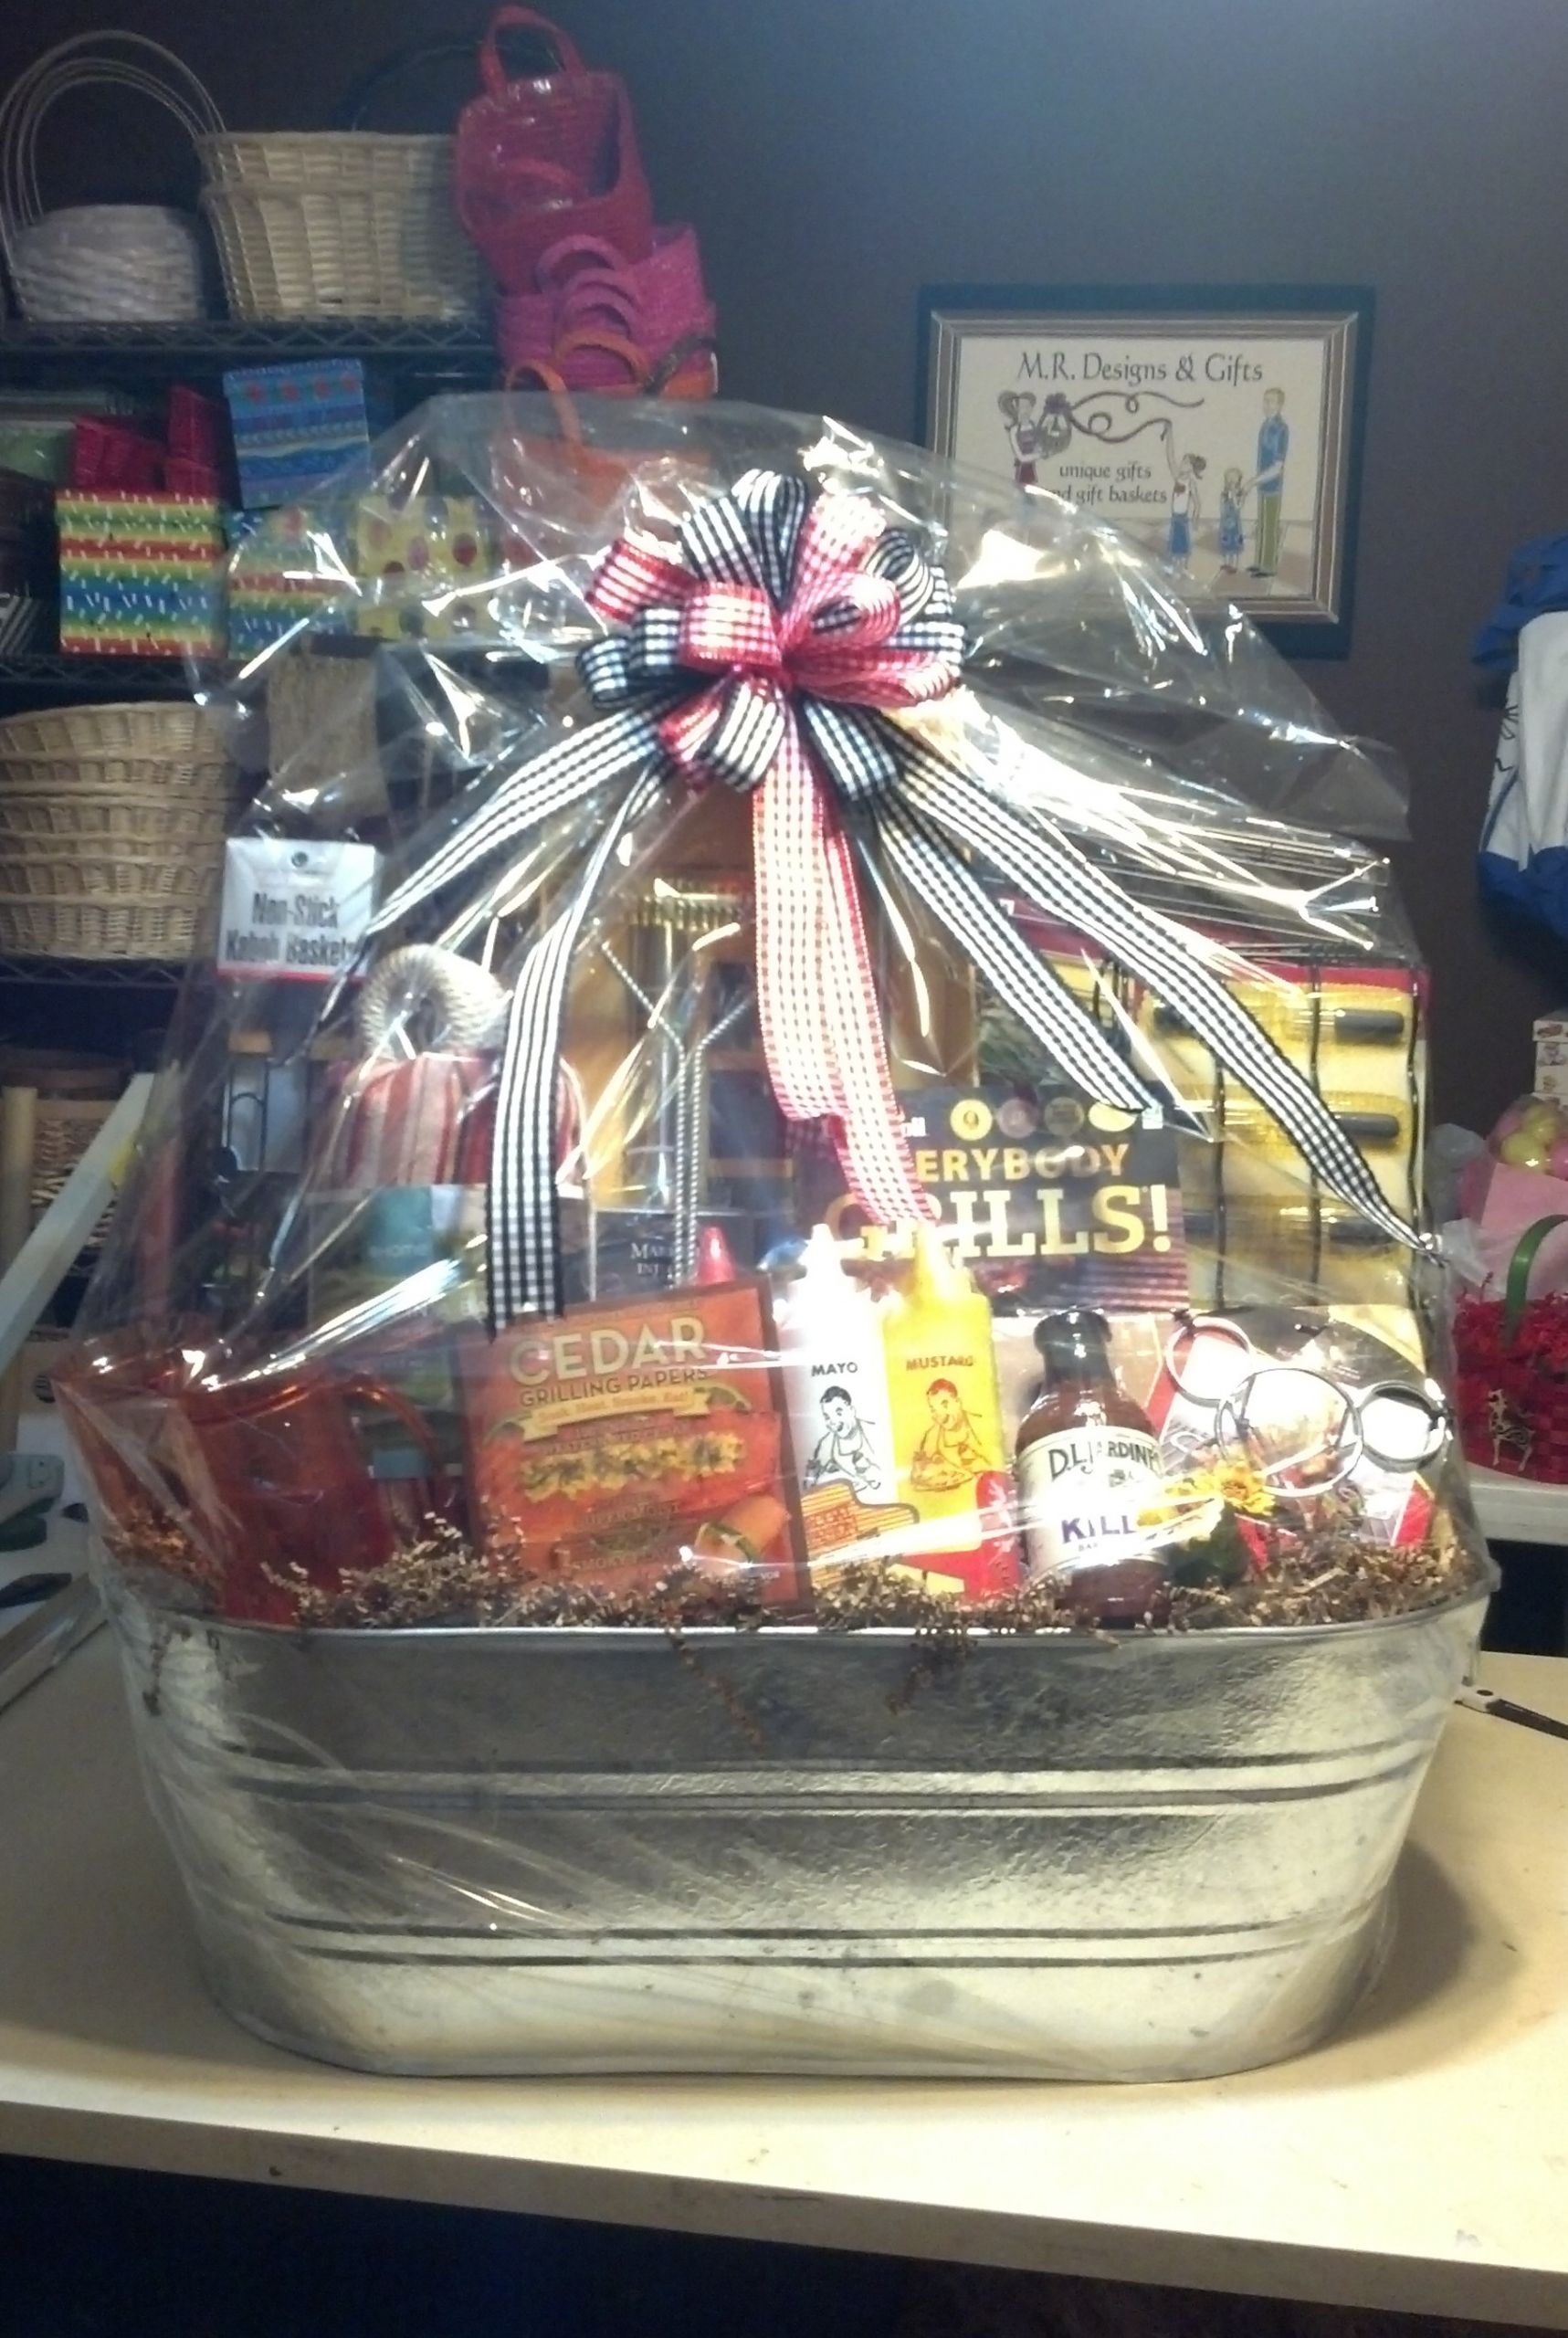 Gift Basket Ideas For Fundraisers
 Special Event and Silent Auction Gift Basket Ideas by M R